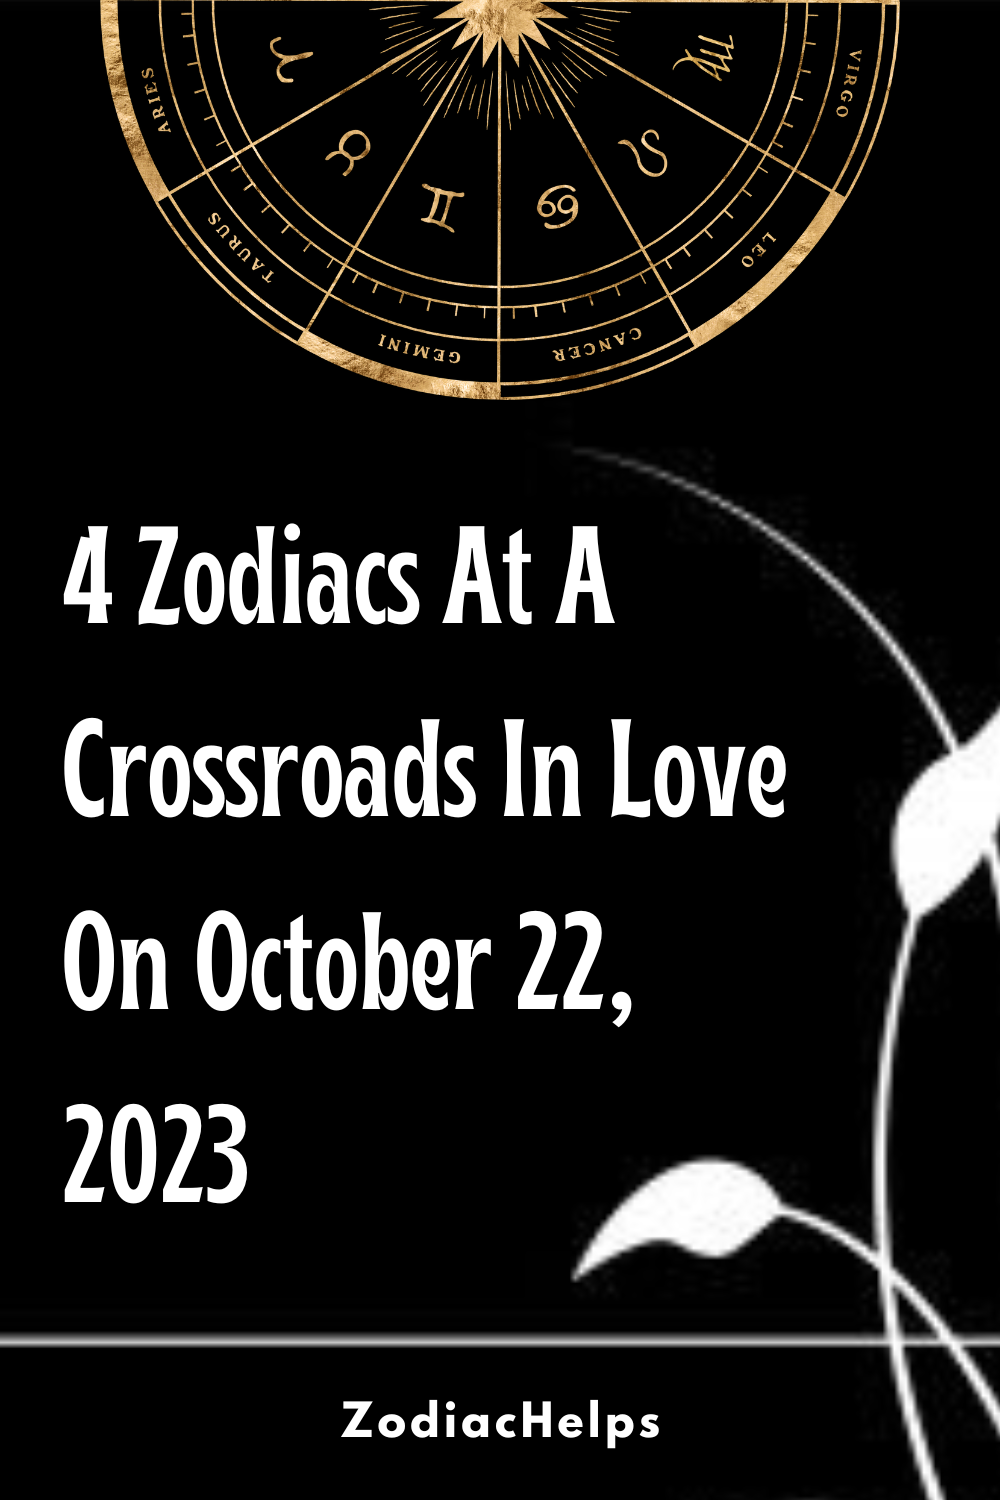 4 Zodiacs At A Crossroads In Love On October 22, 2023